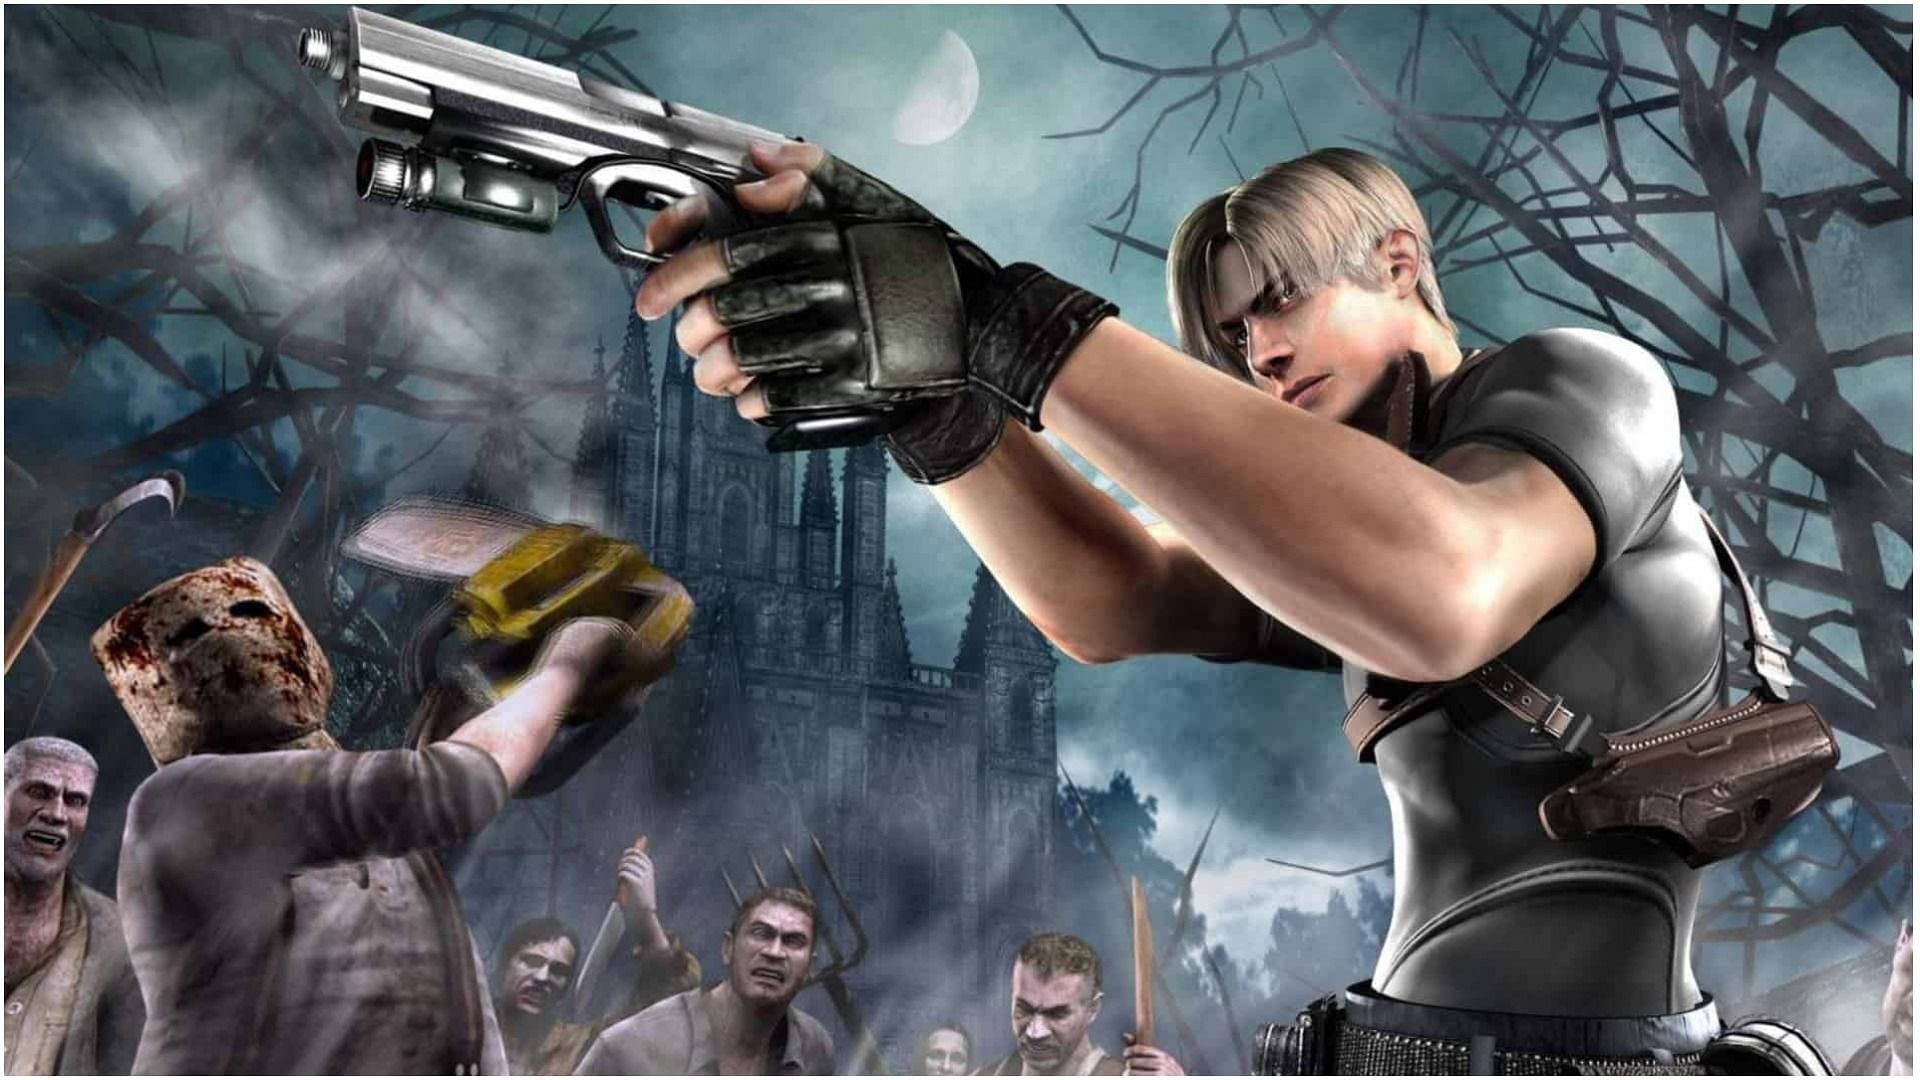 Can the 'Resident Evil 4' Remake Redefine the Franchise's Tone